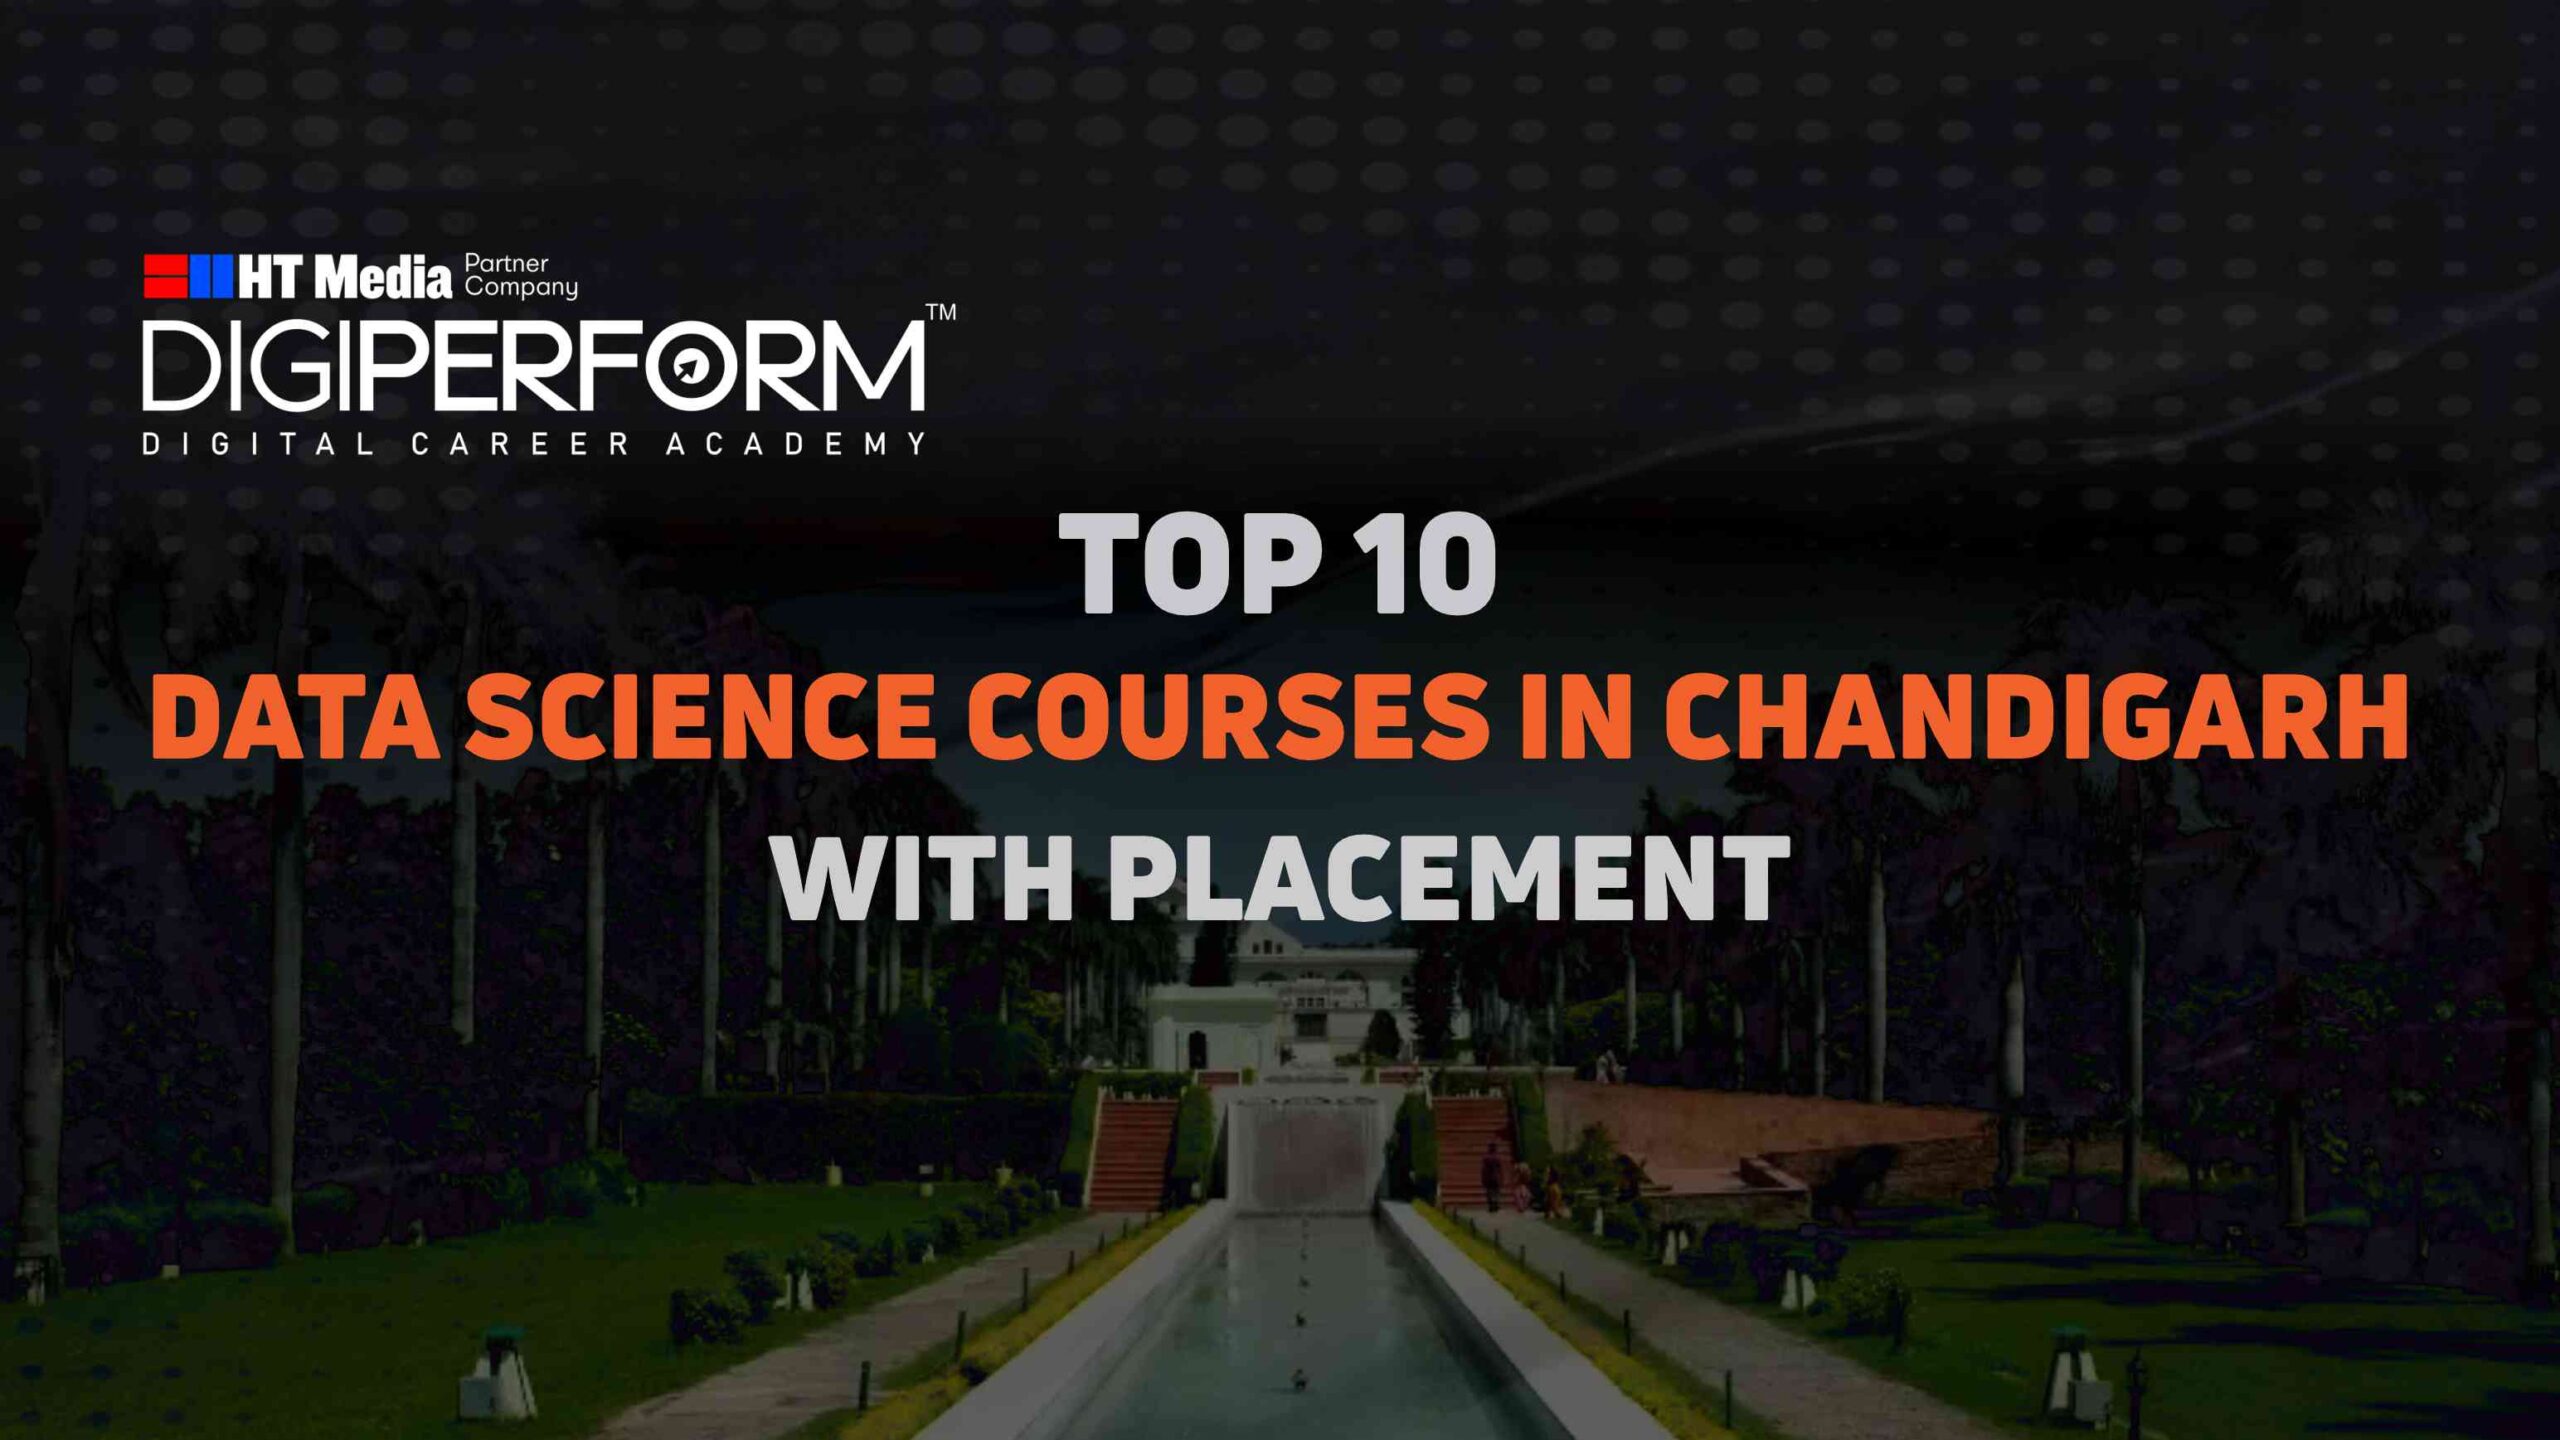 Top 10 Data Science Courses in Chandigarh with Placement